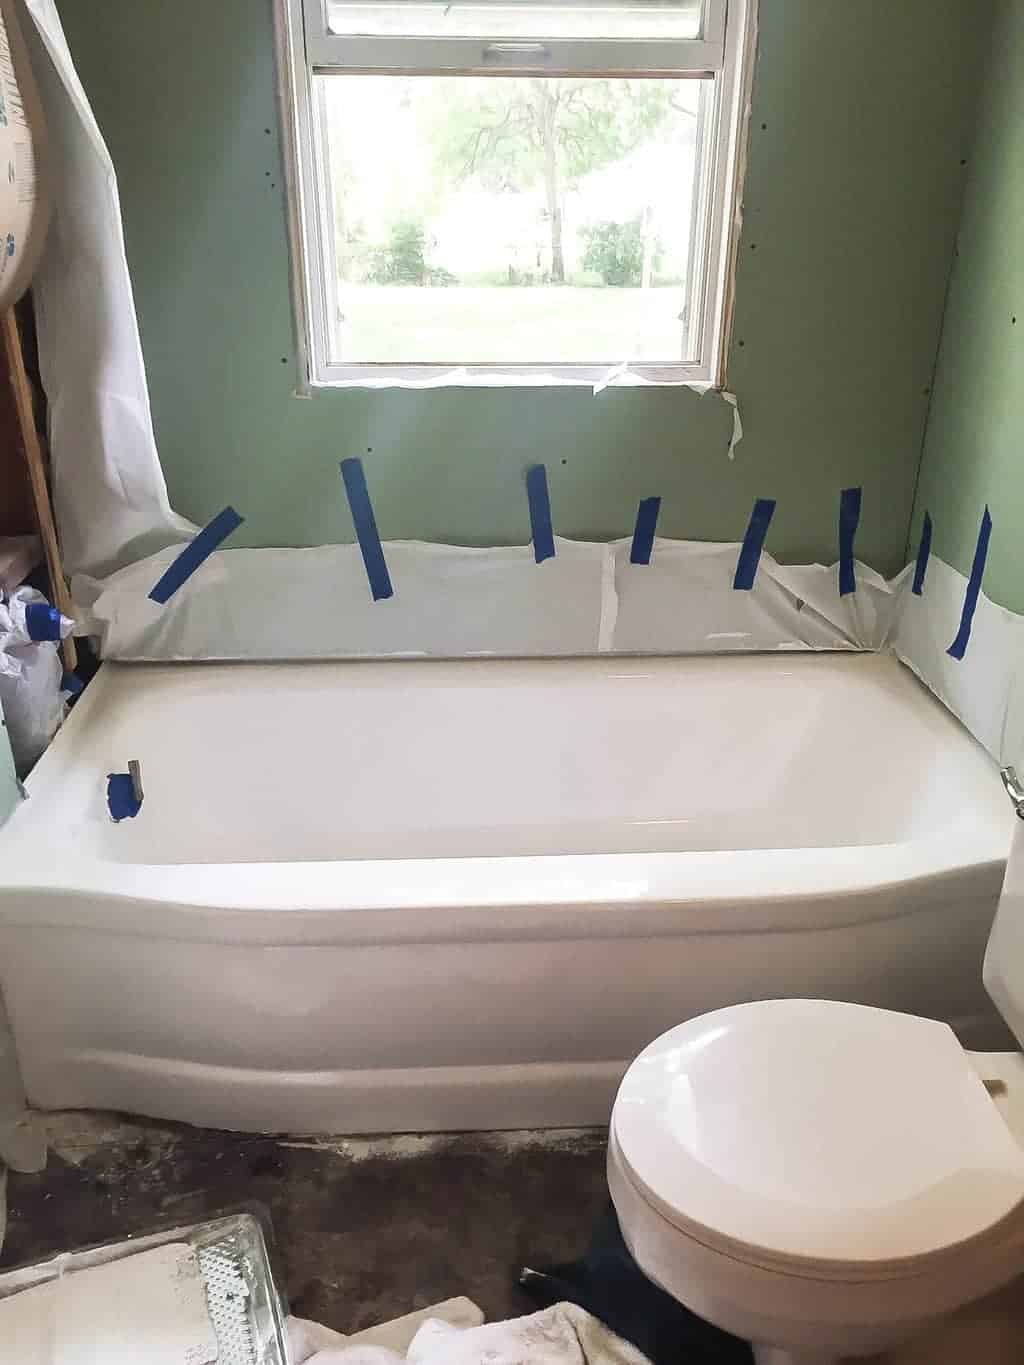 How To Paint A Bathtub Easily Inexpensively My Creative Days